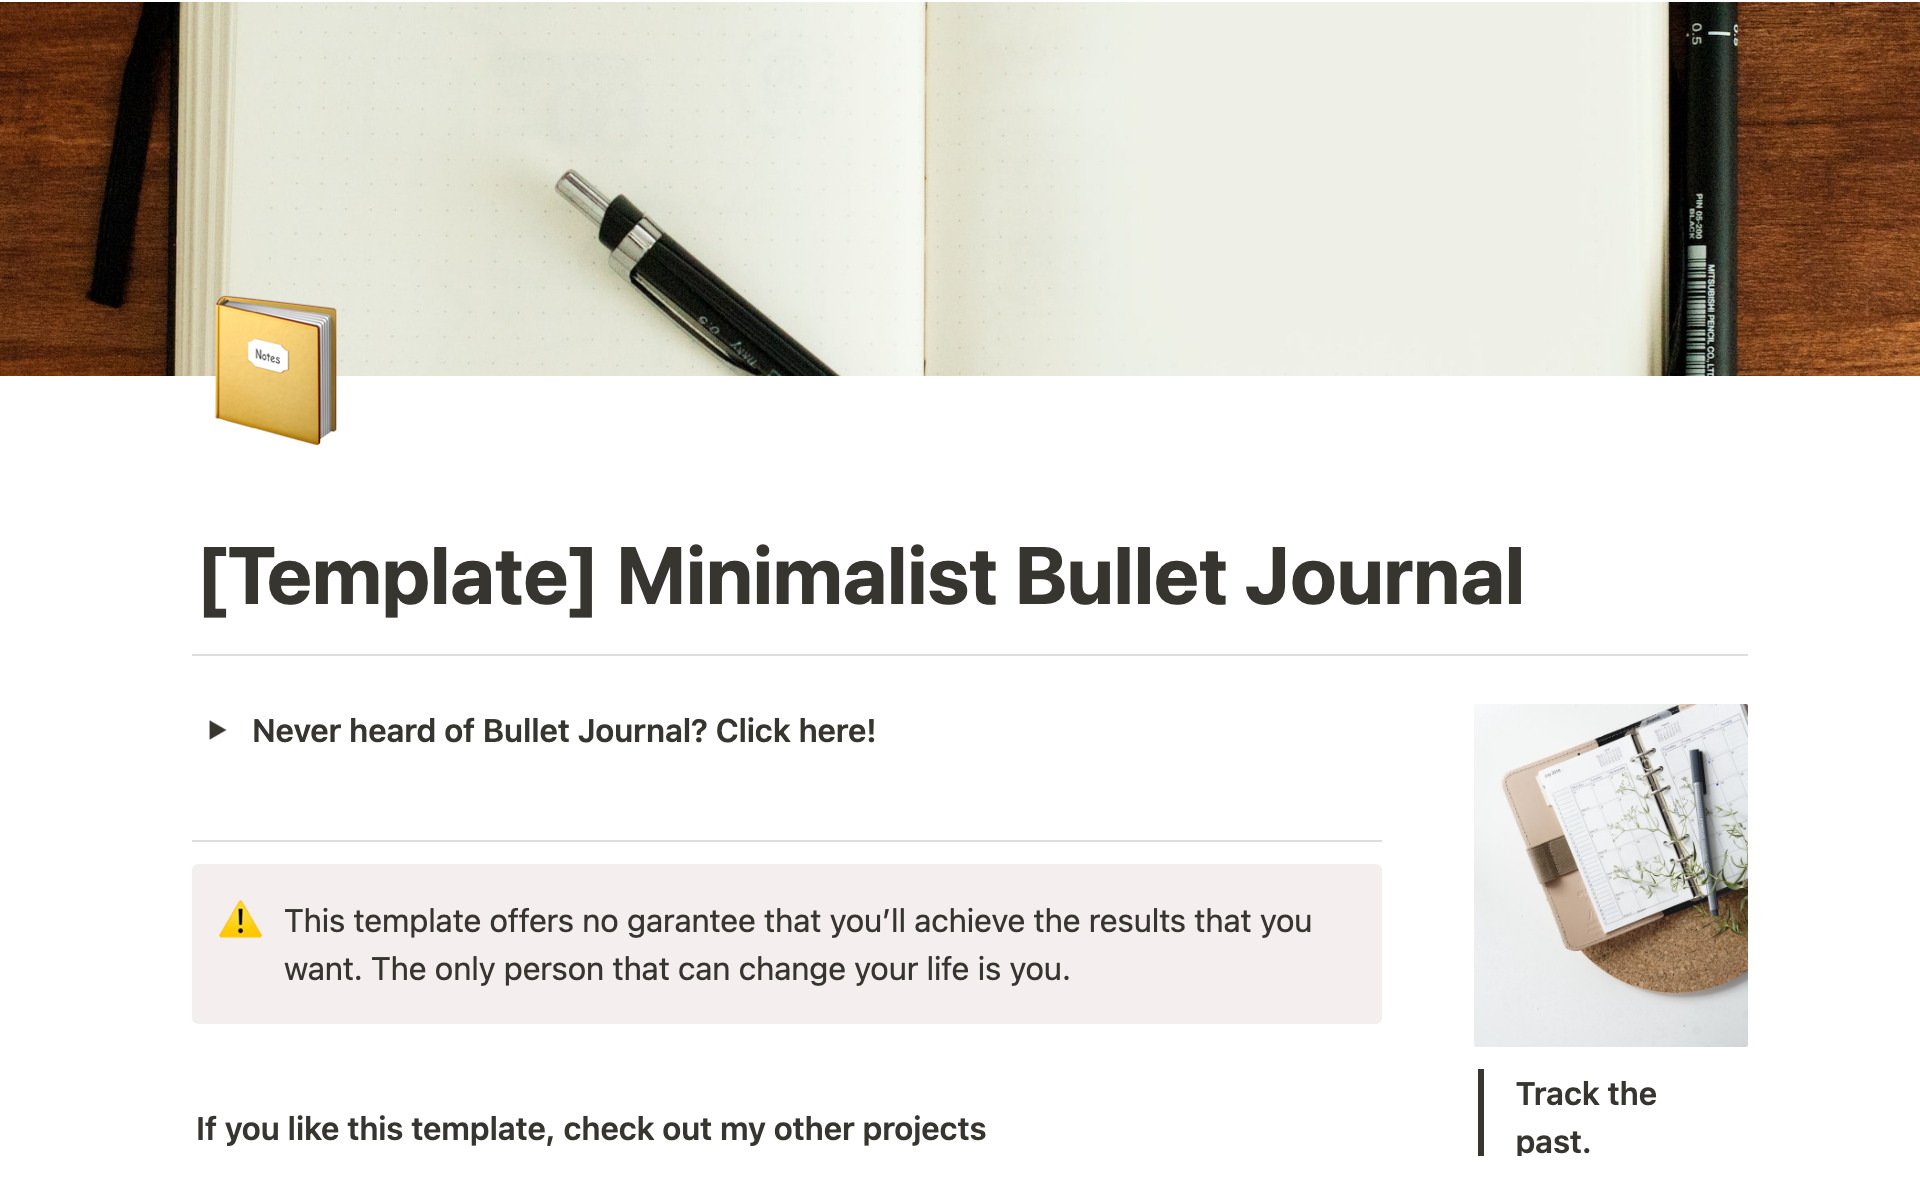 The Bullet Journal Method is an evidence-based technique used by many people around the world.